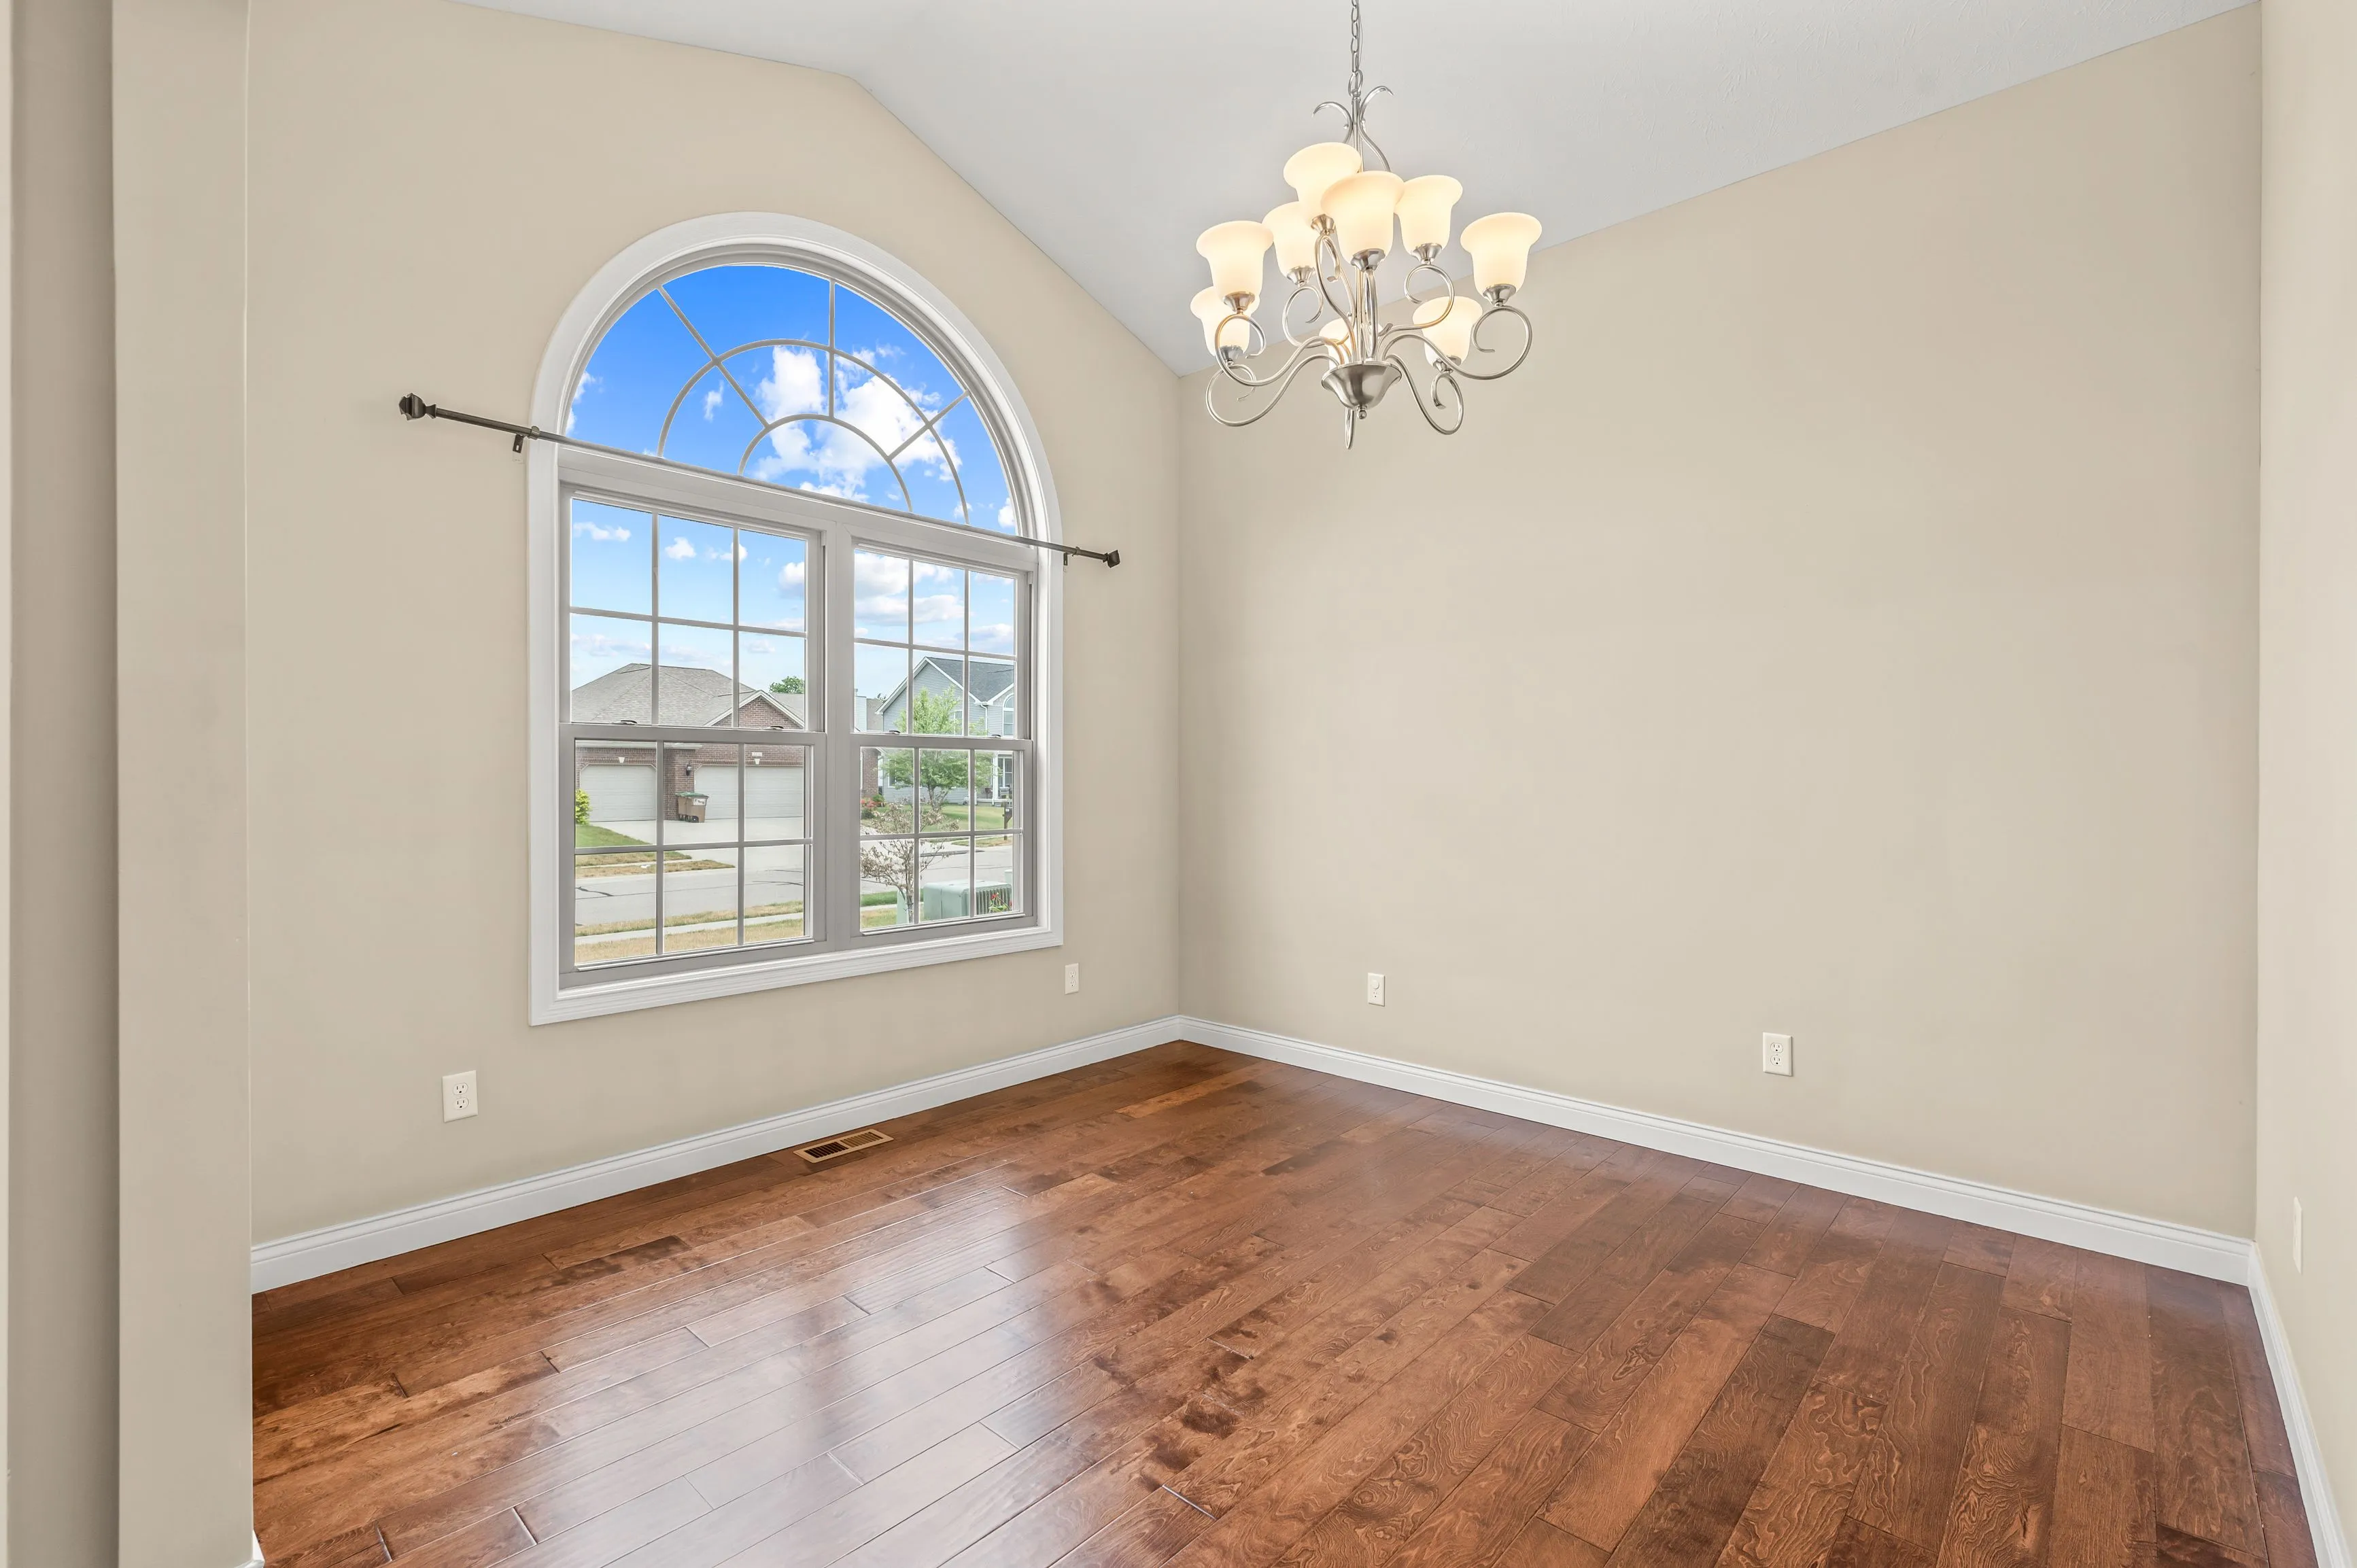 Empty room with polished hardwood floor, beige walls, a large arched window, and a chandelier.